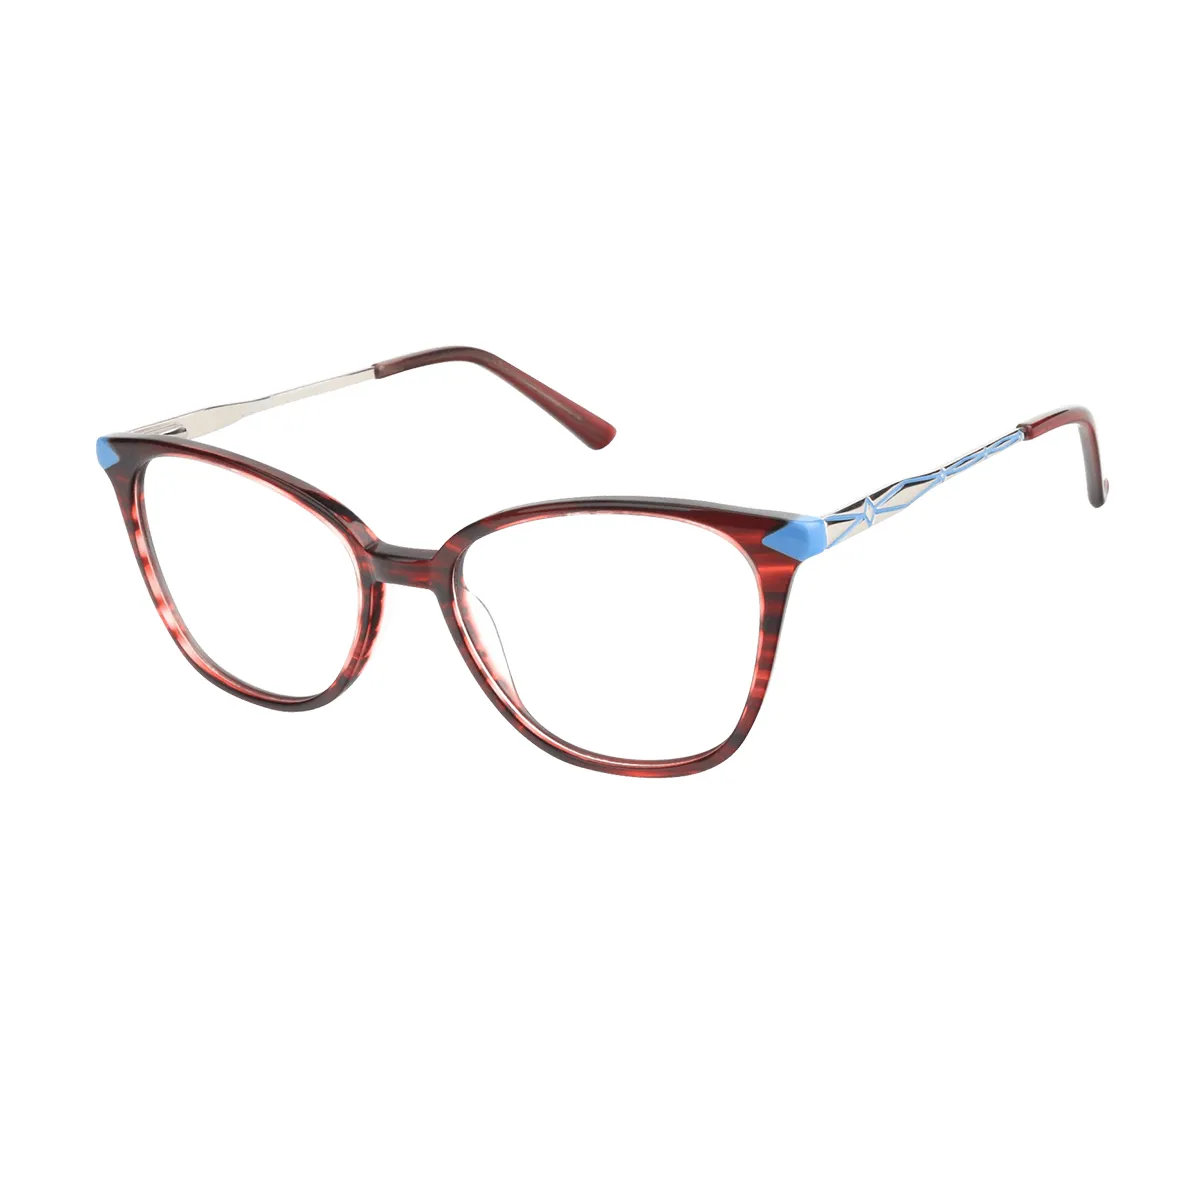 Iona - Square Red-blue Glasses for Women